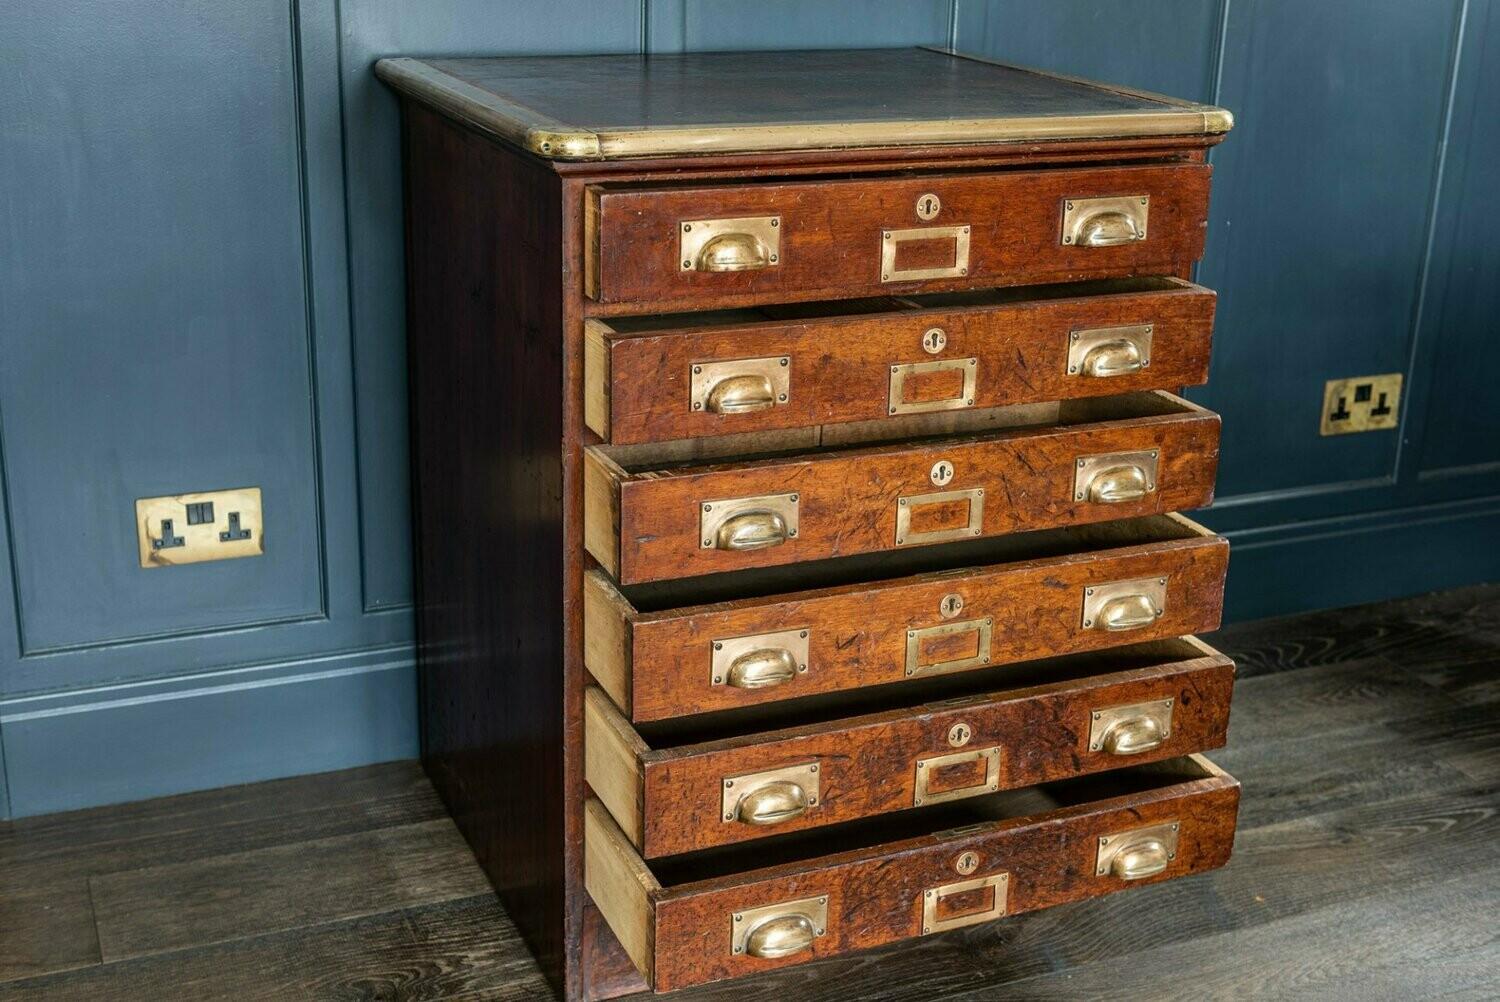 Mahogany brass capped bankers drawers. English, circa 1920

Formerly bankers drawers and subsequently used as workshop drawers which has created an amazing wear and patination. Unusual brass/bronze capping to the oxblood leather inset top.